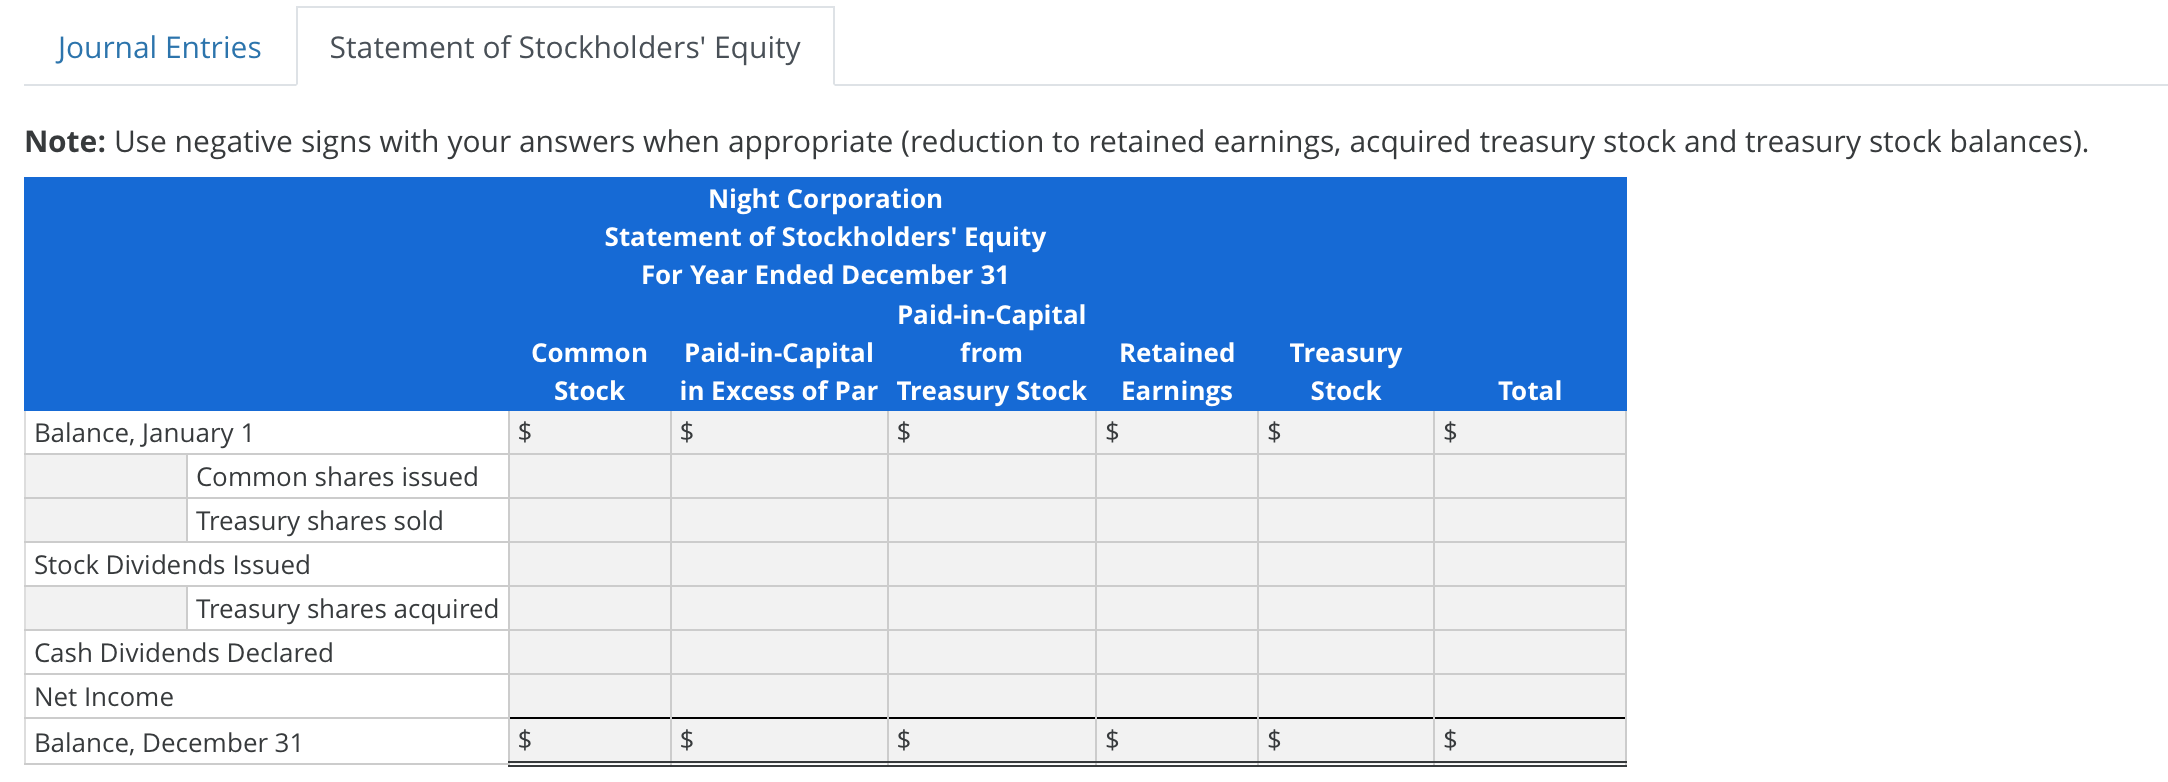 Journal EntriesStatement of Stockholders EquityNote: Use negative signs with your answers when appropriate (reduction to r